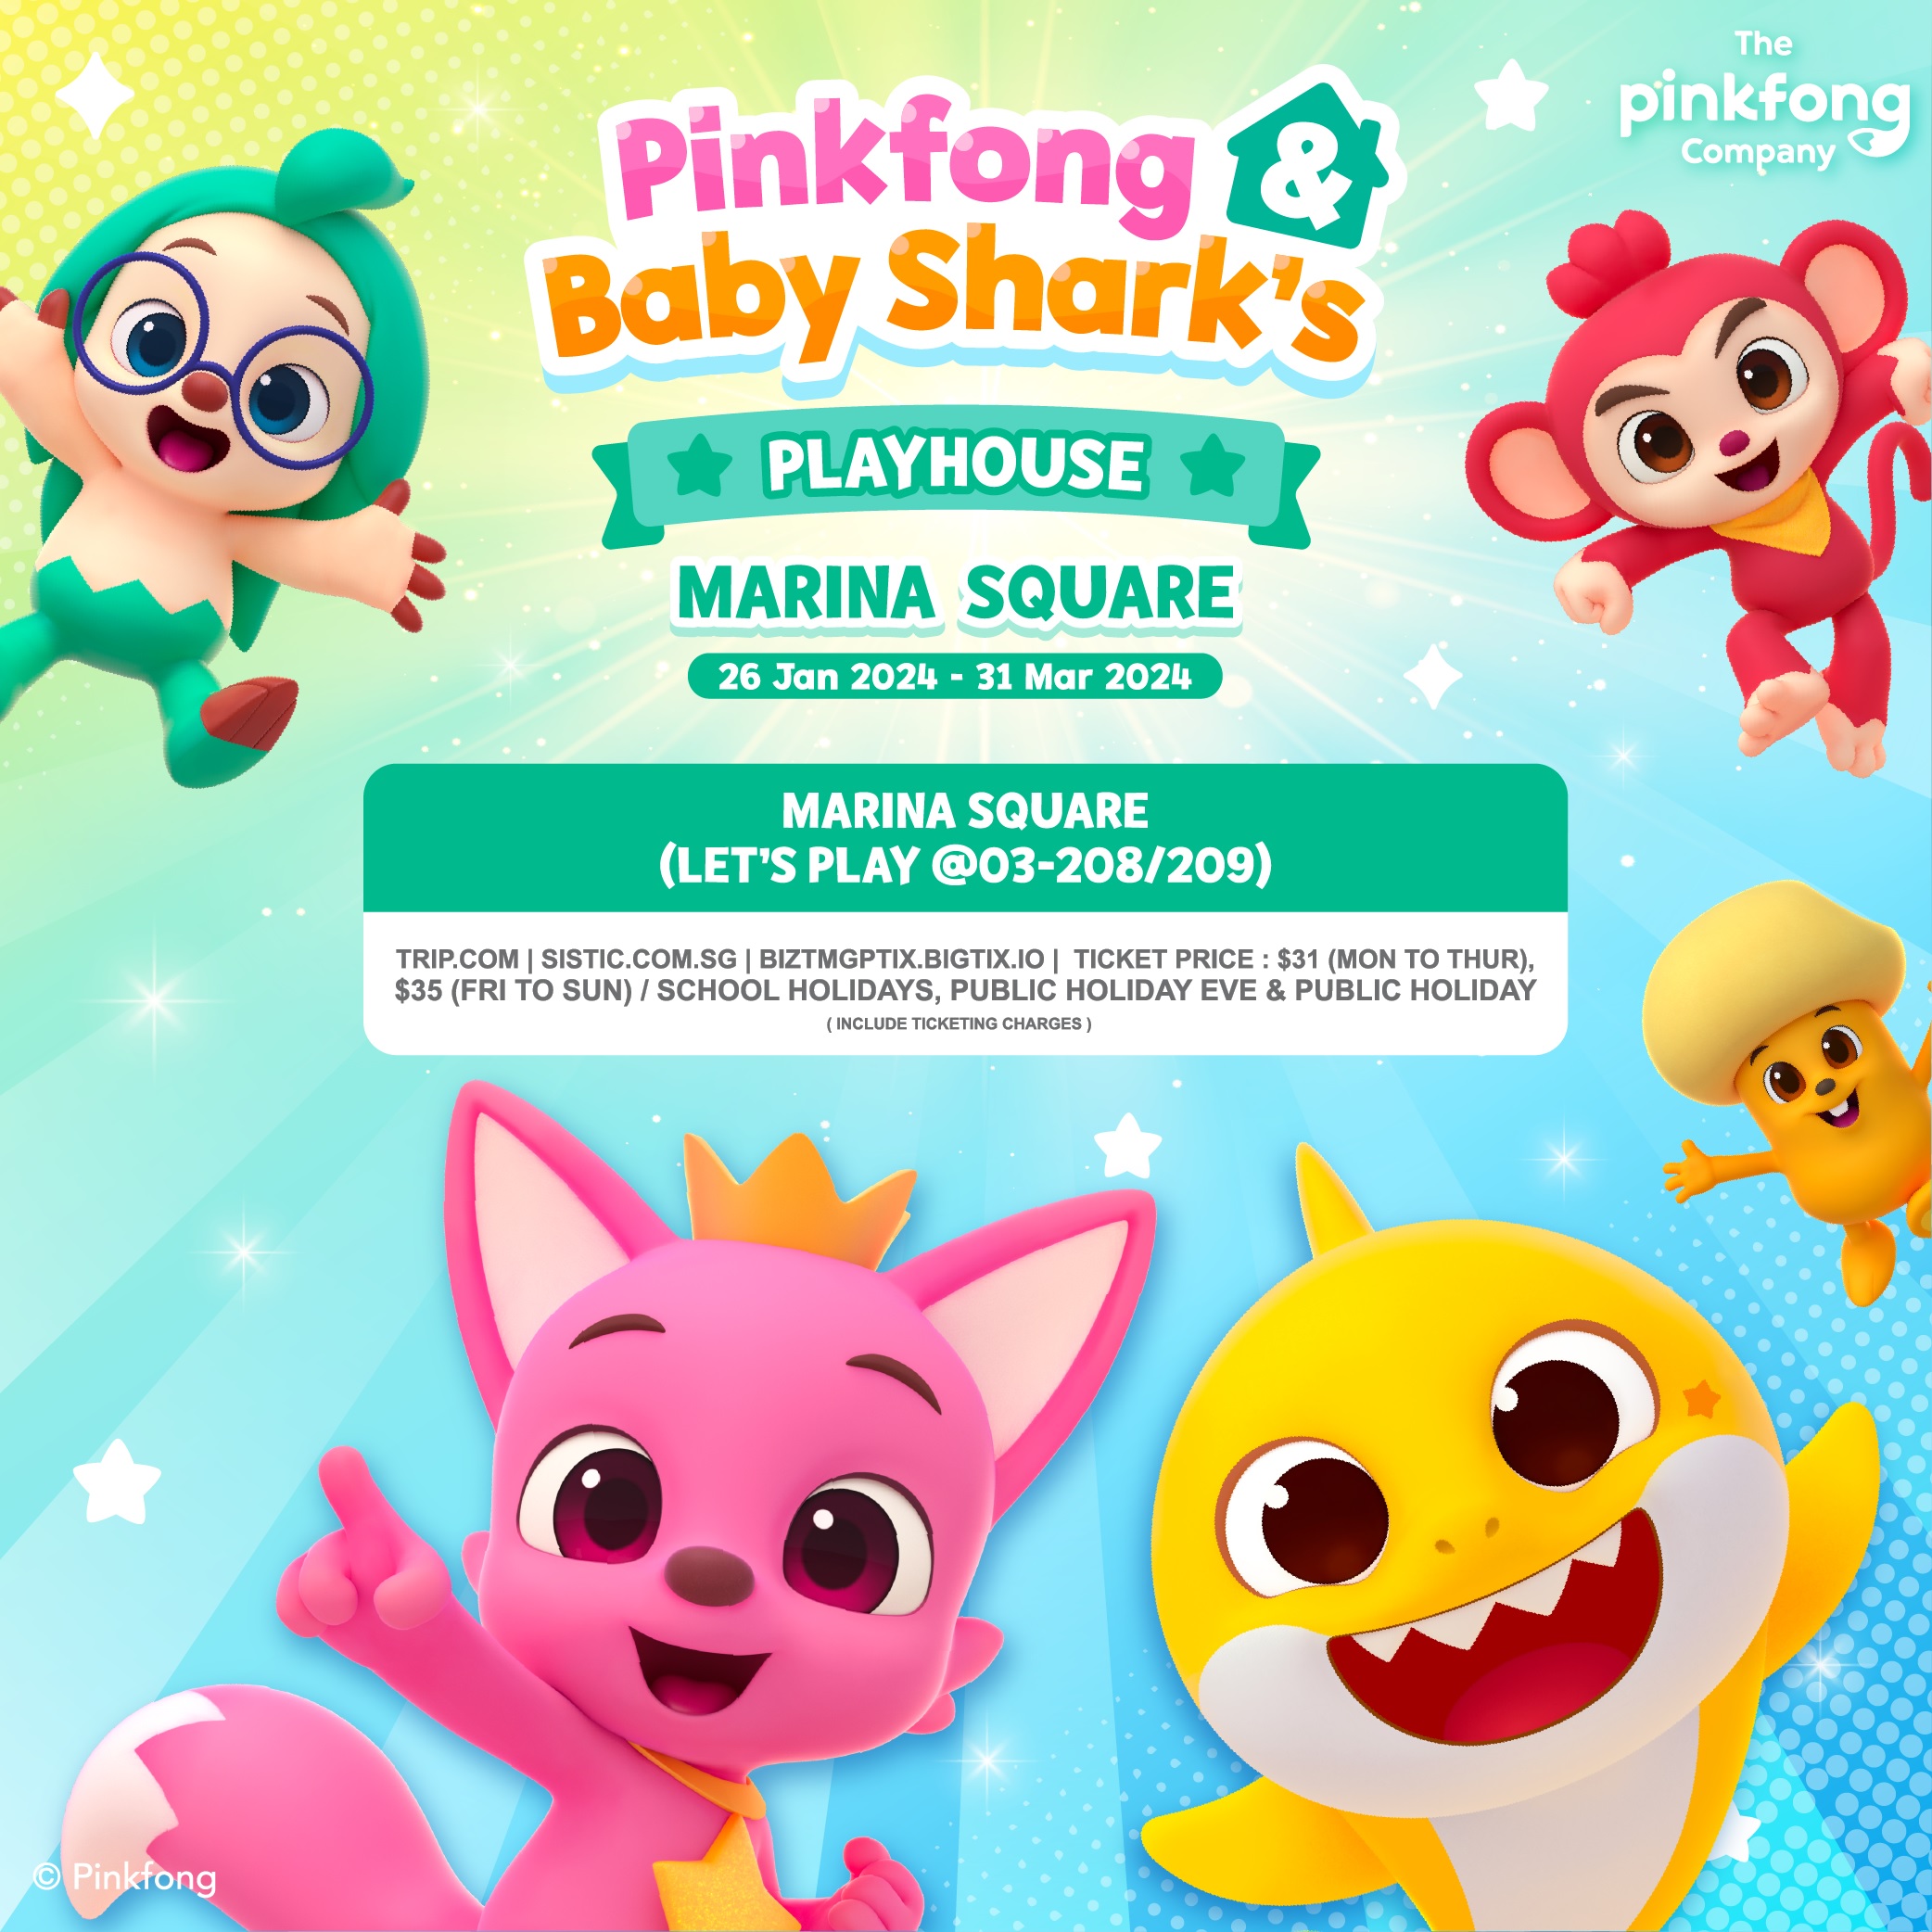 https://www.onepa.gov.sg/-/media/project/pa/pinkfong-and-baby-shark-playhouse-image-500x500.jpg?rev=217c916cd94f4258945c99a8a21c91ce